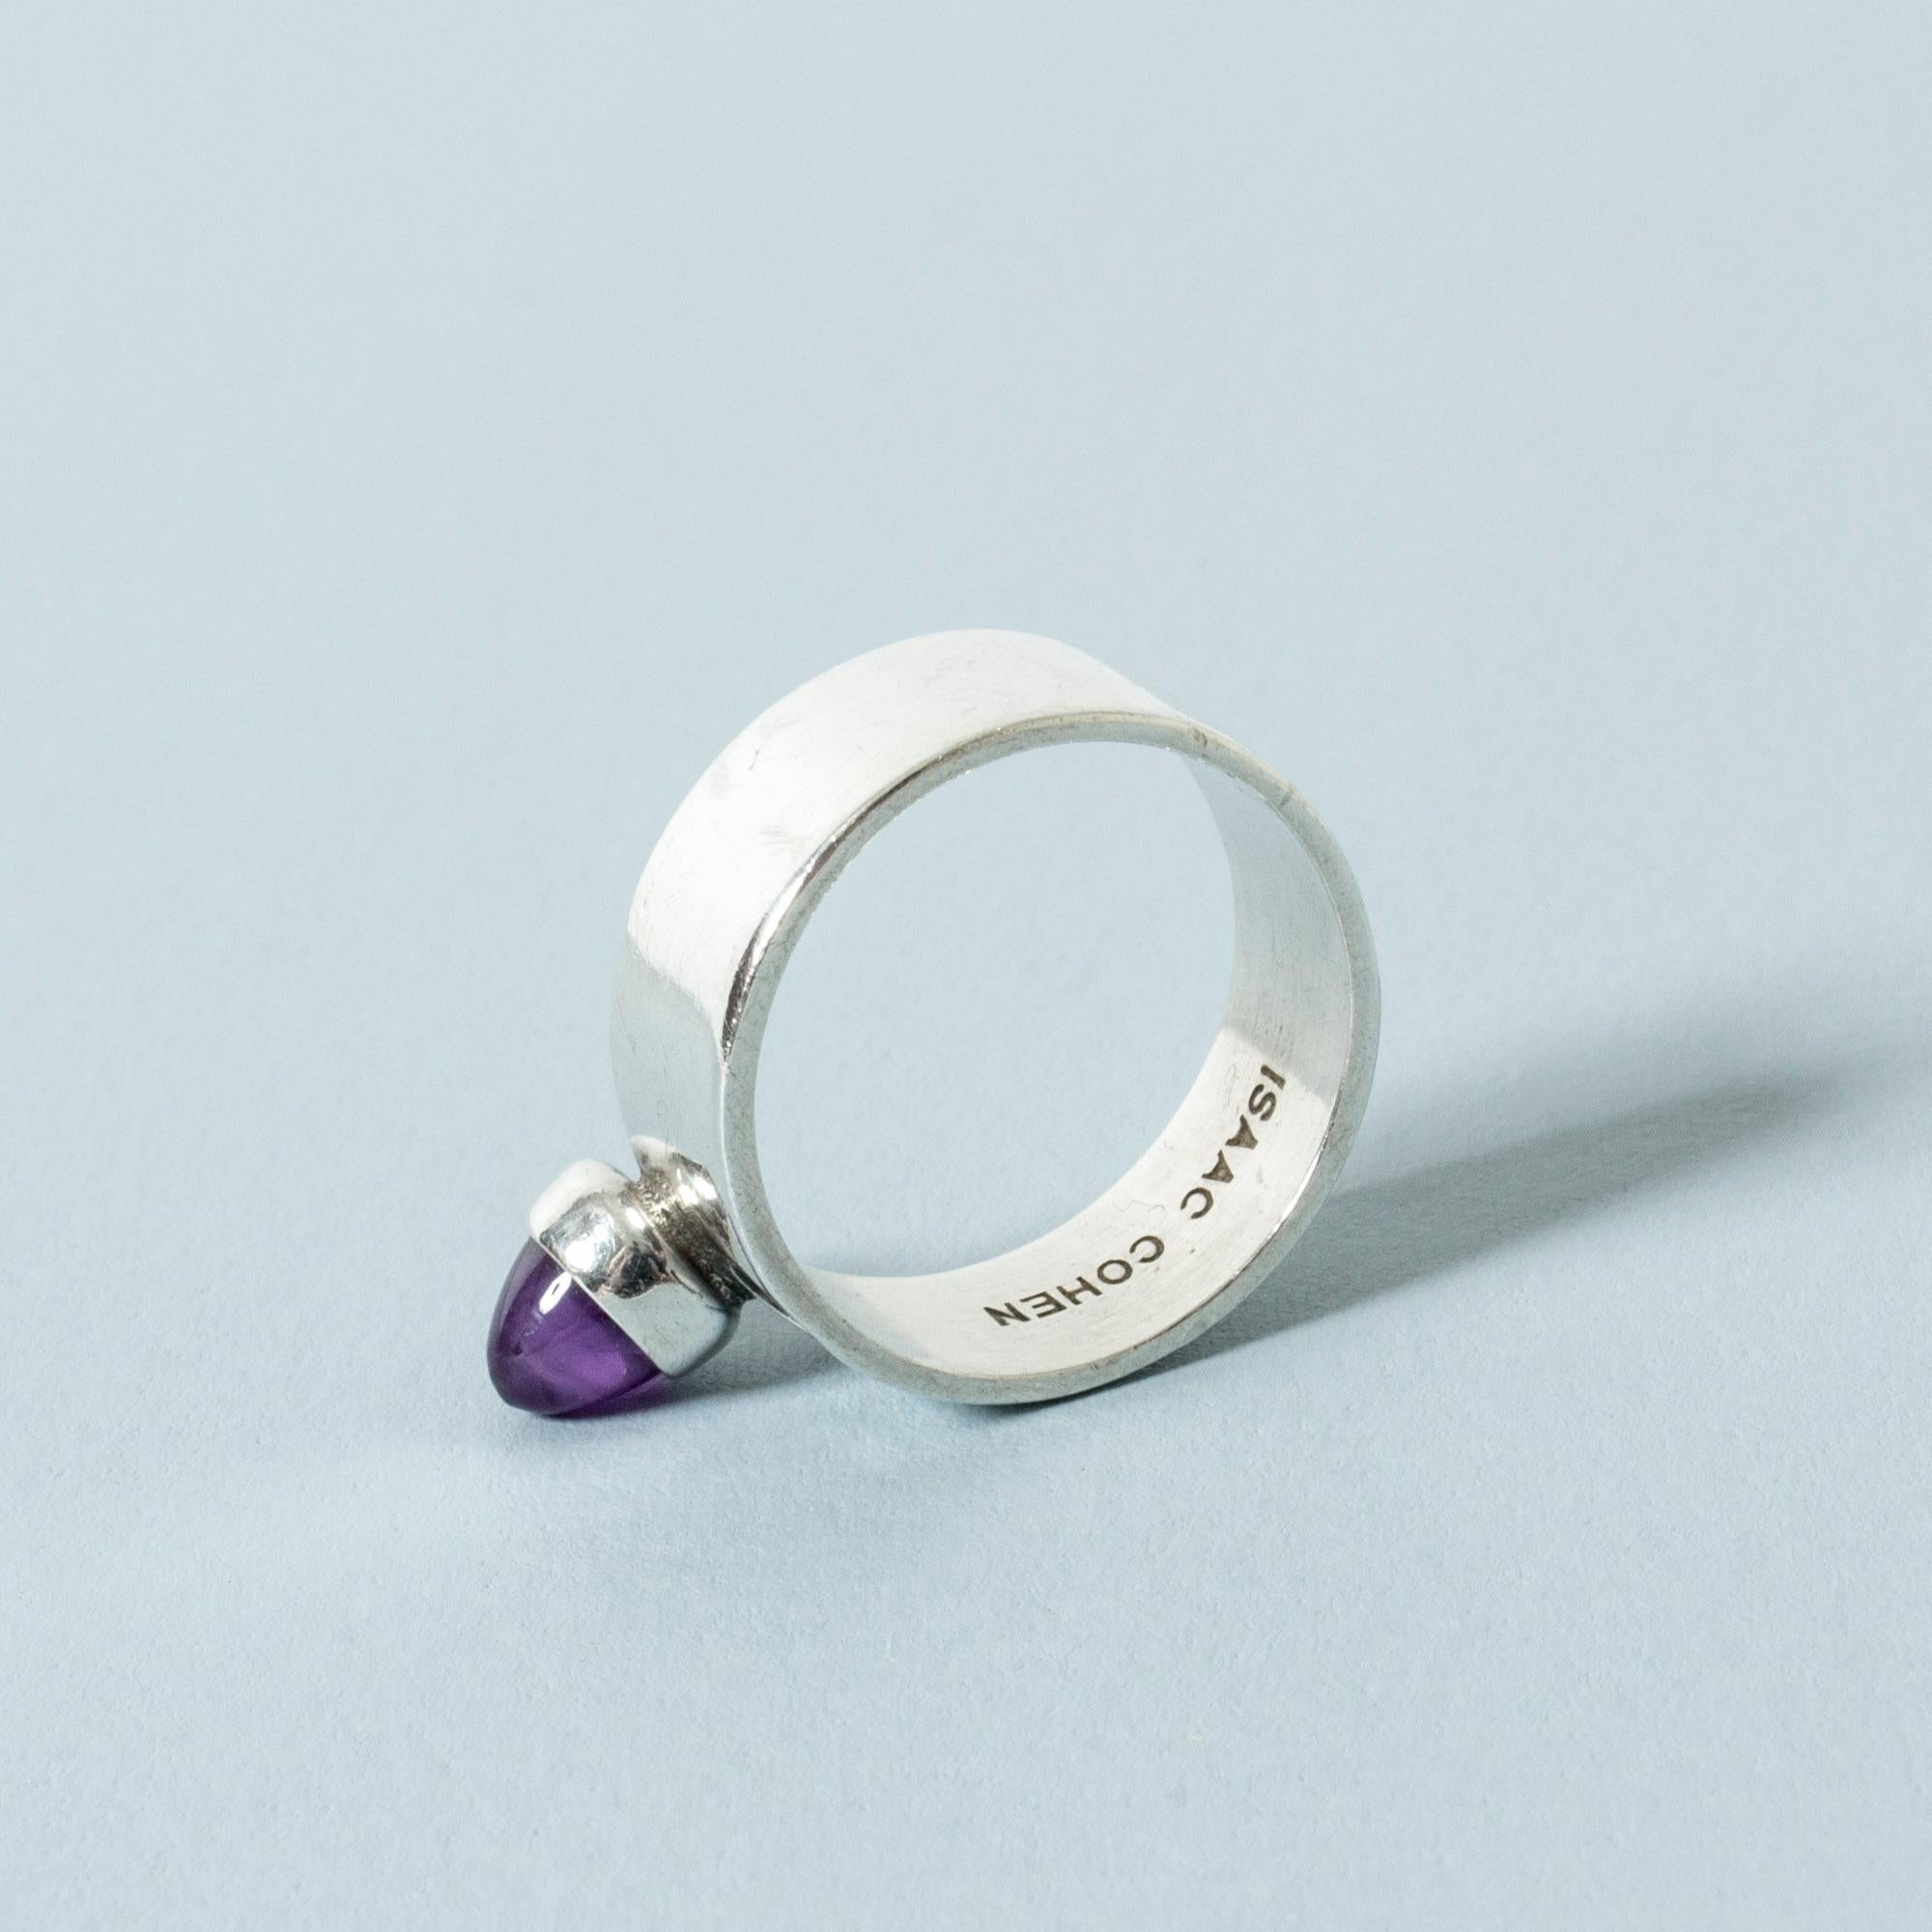 Modernist Silver and Amethyst Ring by Isaac Cohen, Sweden, 1967